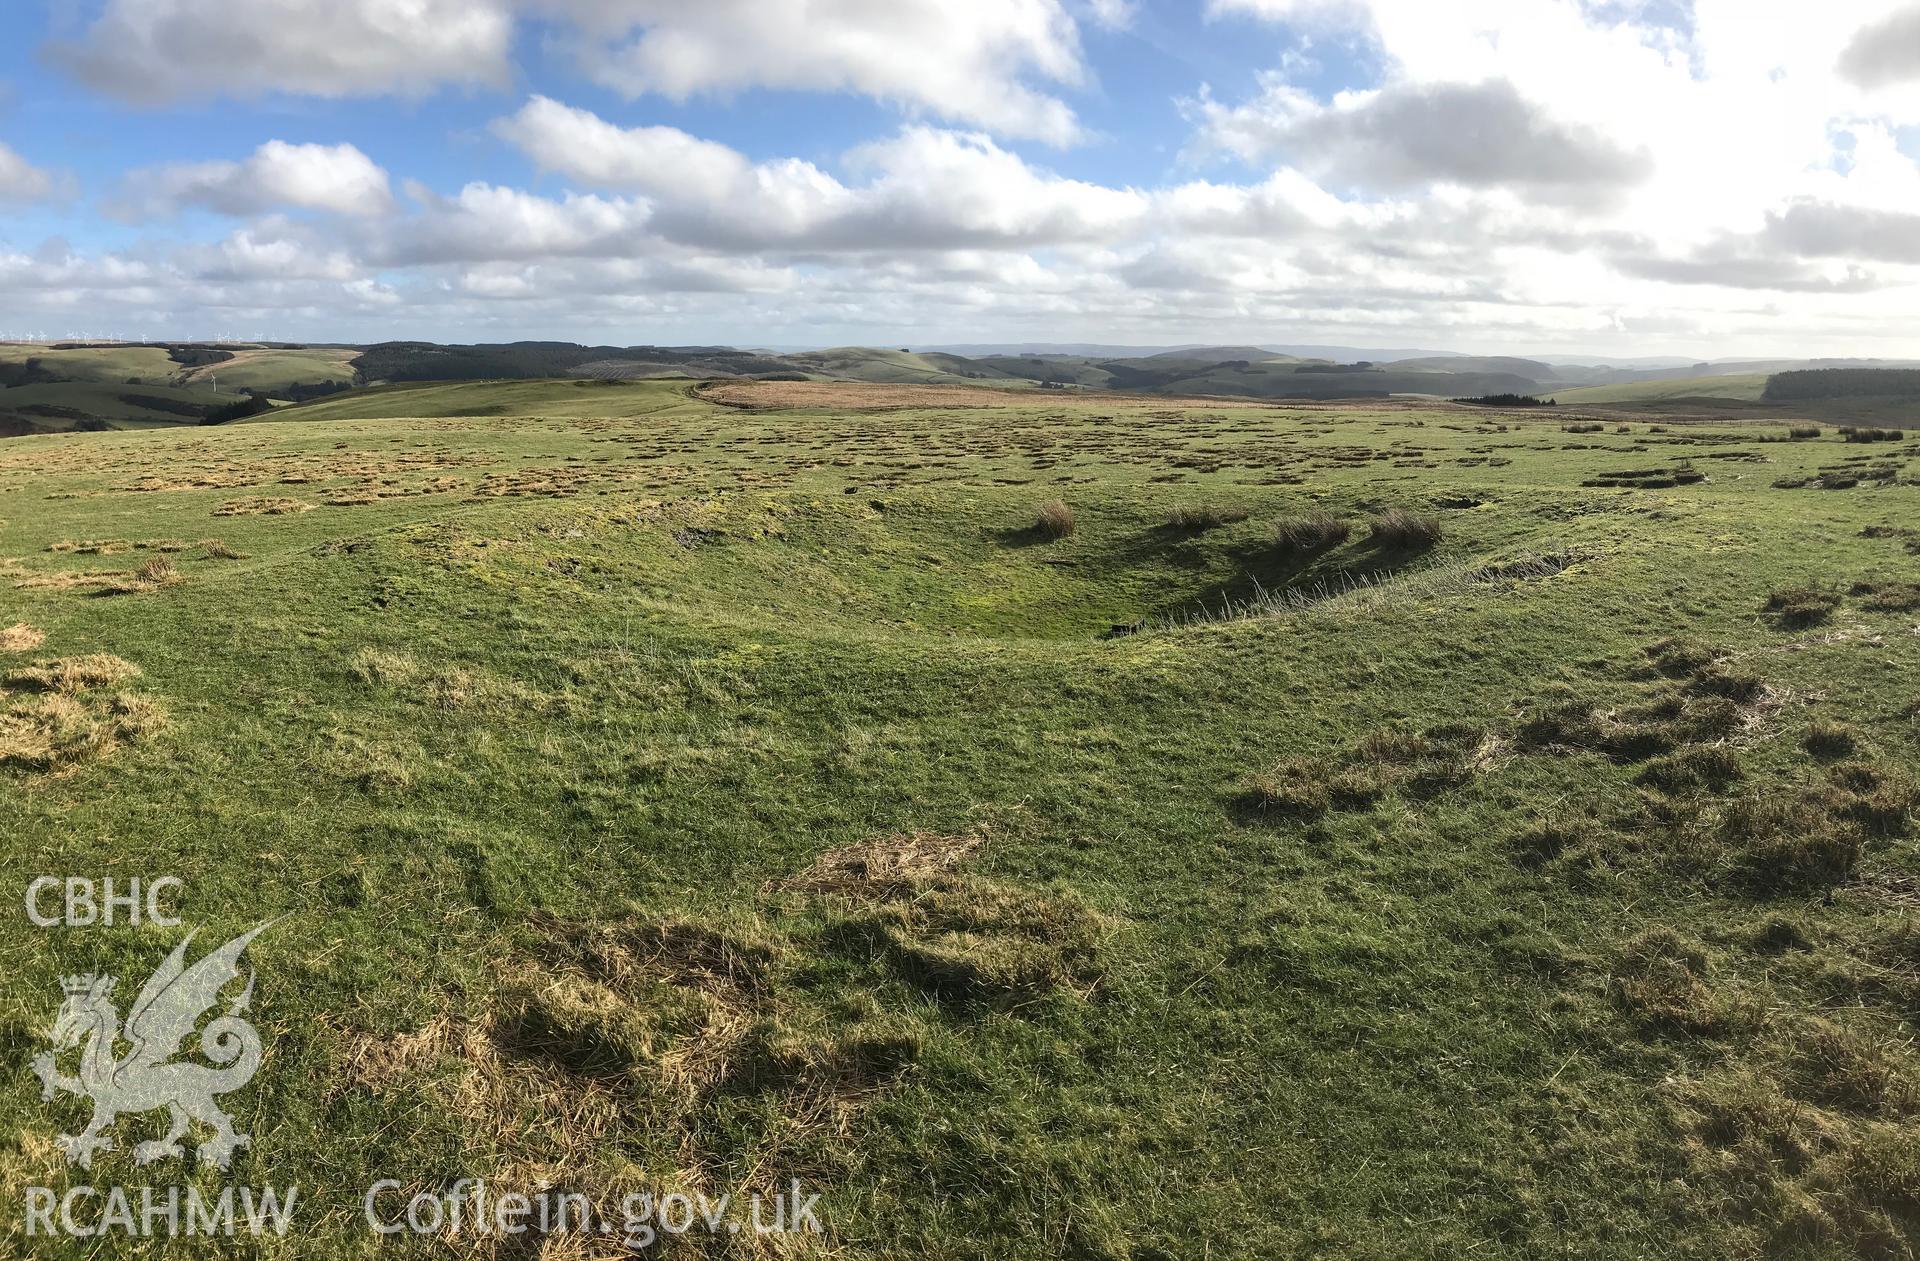 Digital colour photograph of an area of apparent hushing features north east of Penycrocbren, Llanbrynmair, taken by Paul R. Davis on 16th February 2019.